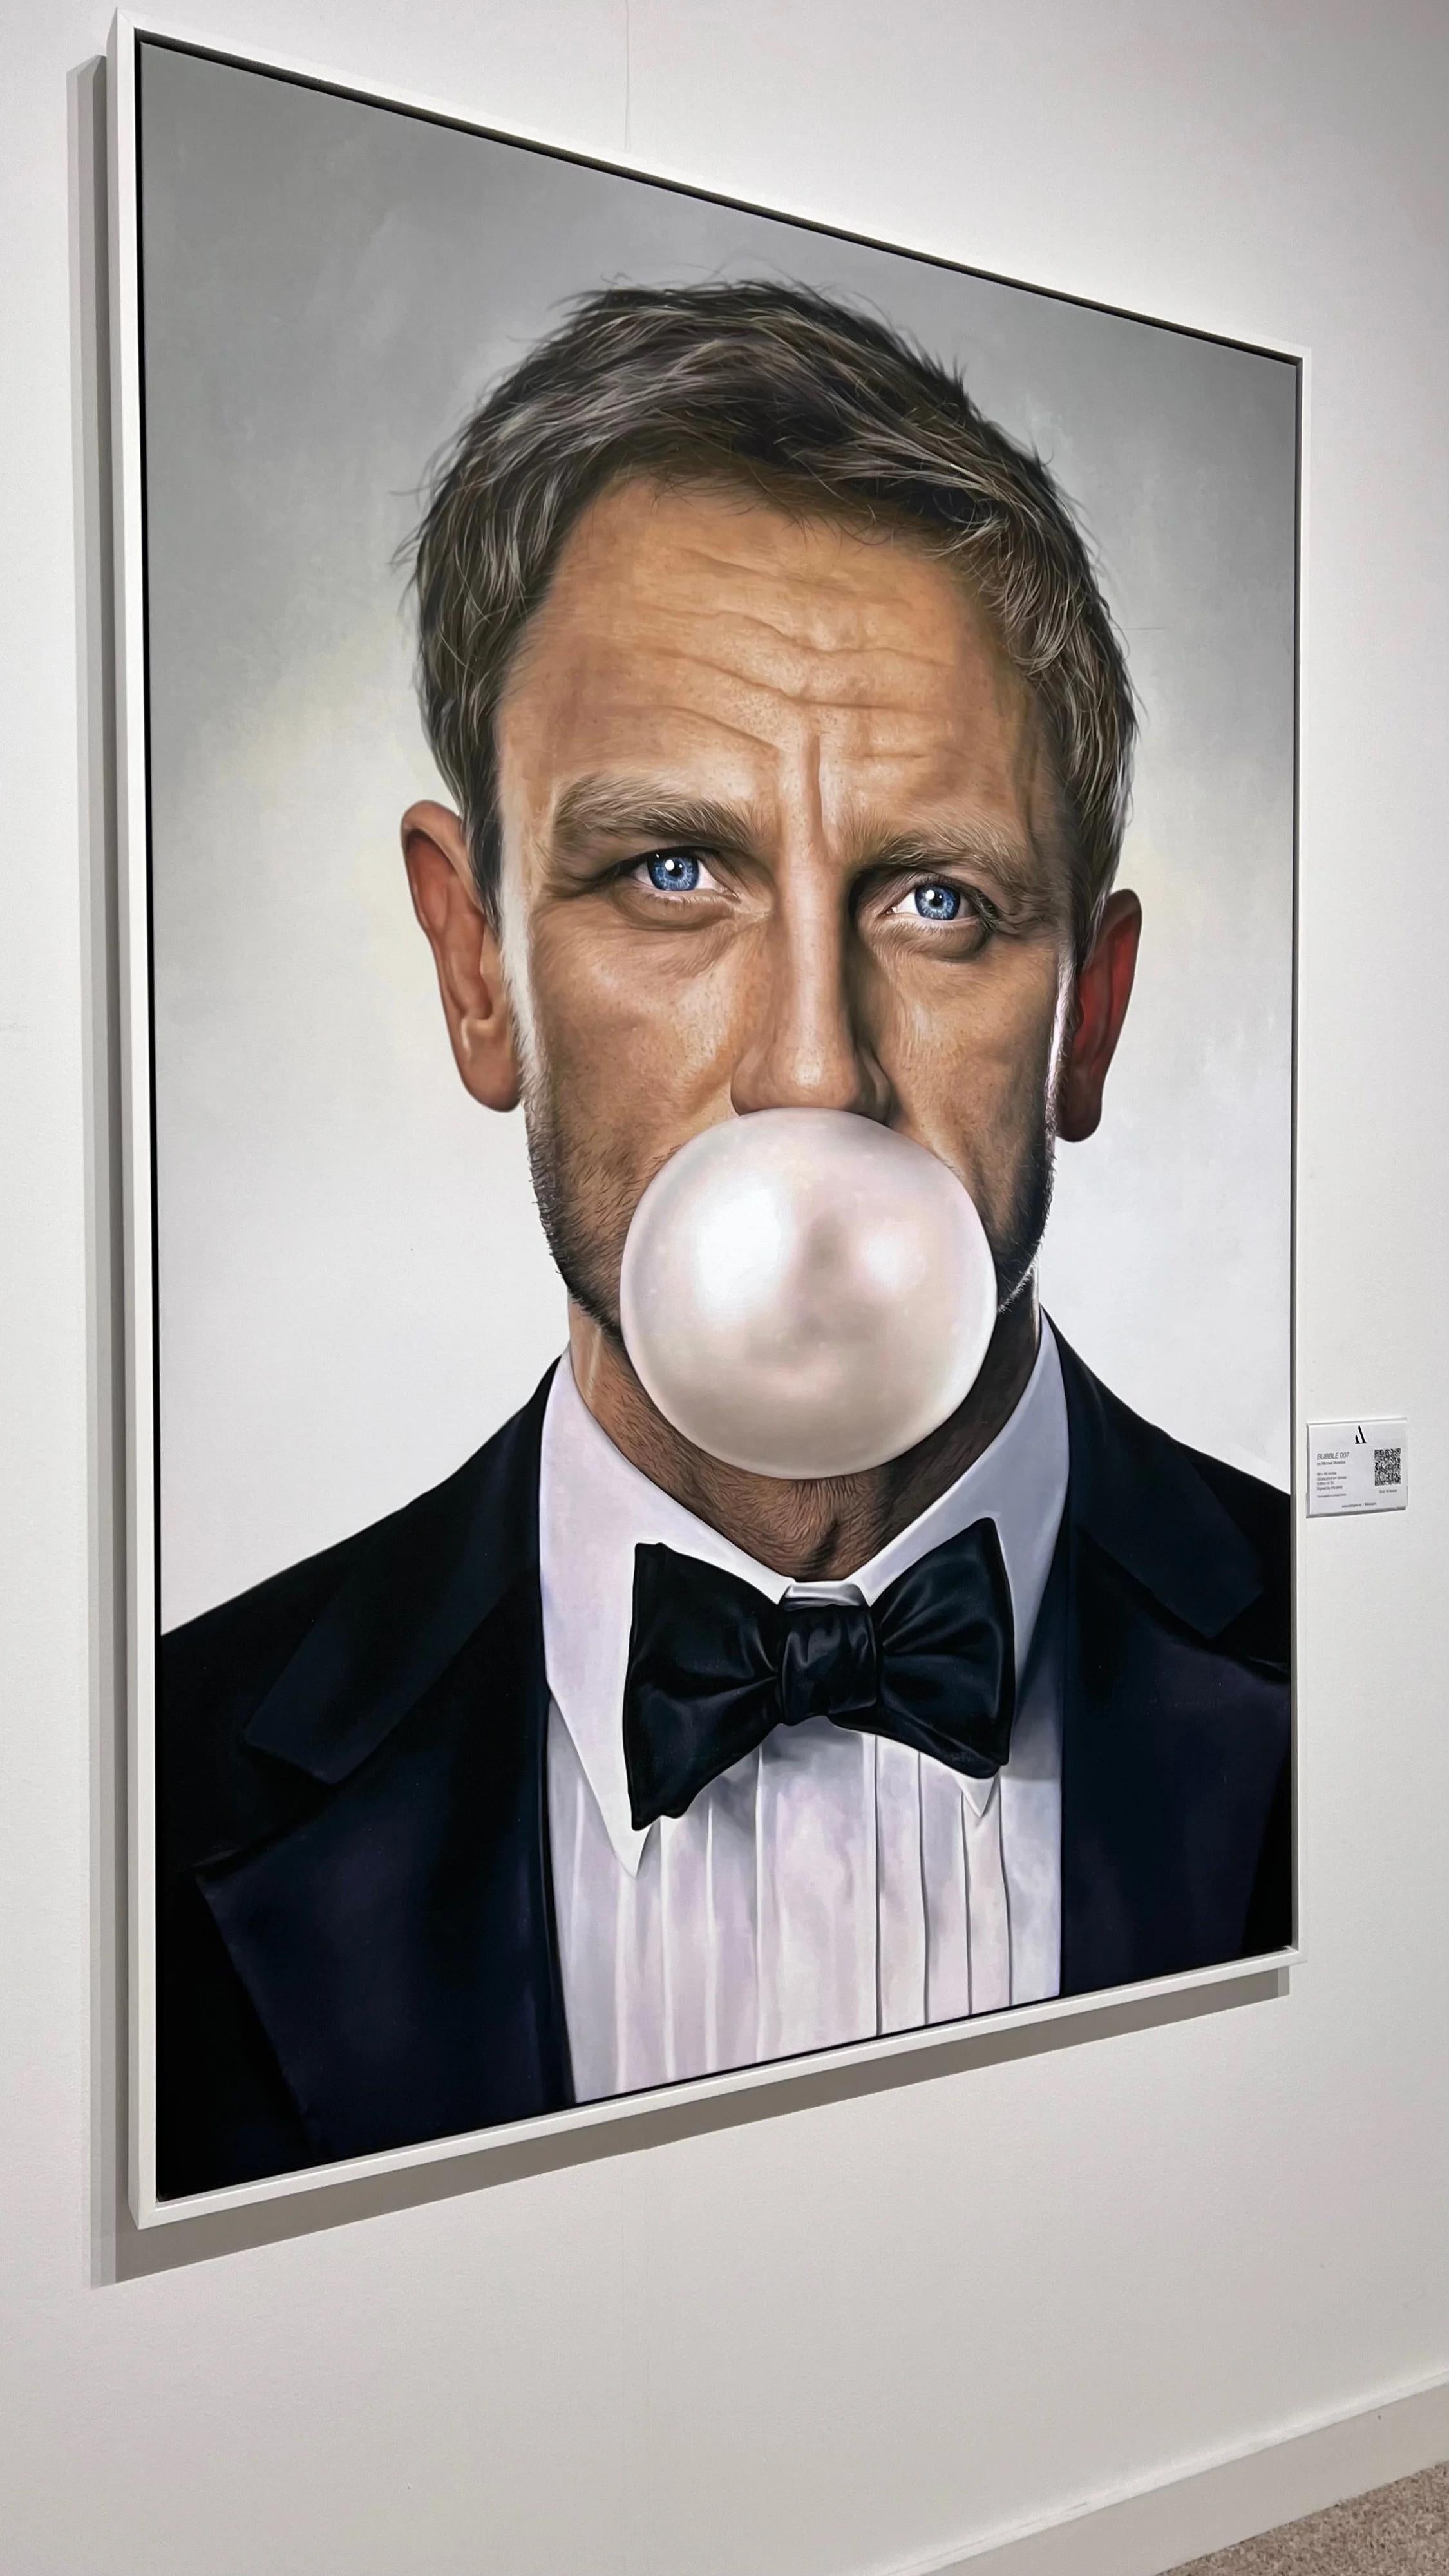 MICHAEL MOEBIUS
Bubble 07, 2023
Signed and numbered by artist
Giclee print on canvas, unframed
40 x 28 inches, Edition of 250
68 x 48 inches, Edition of 25

This piece is currently on display at Art Angels. 